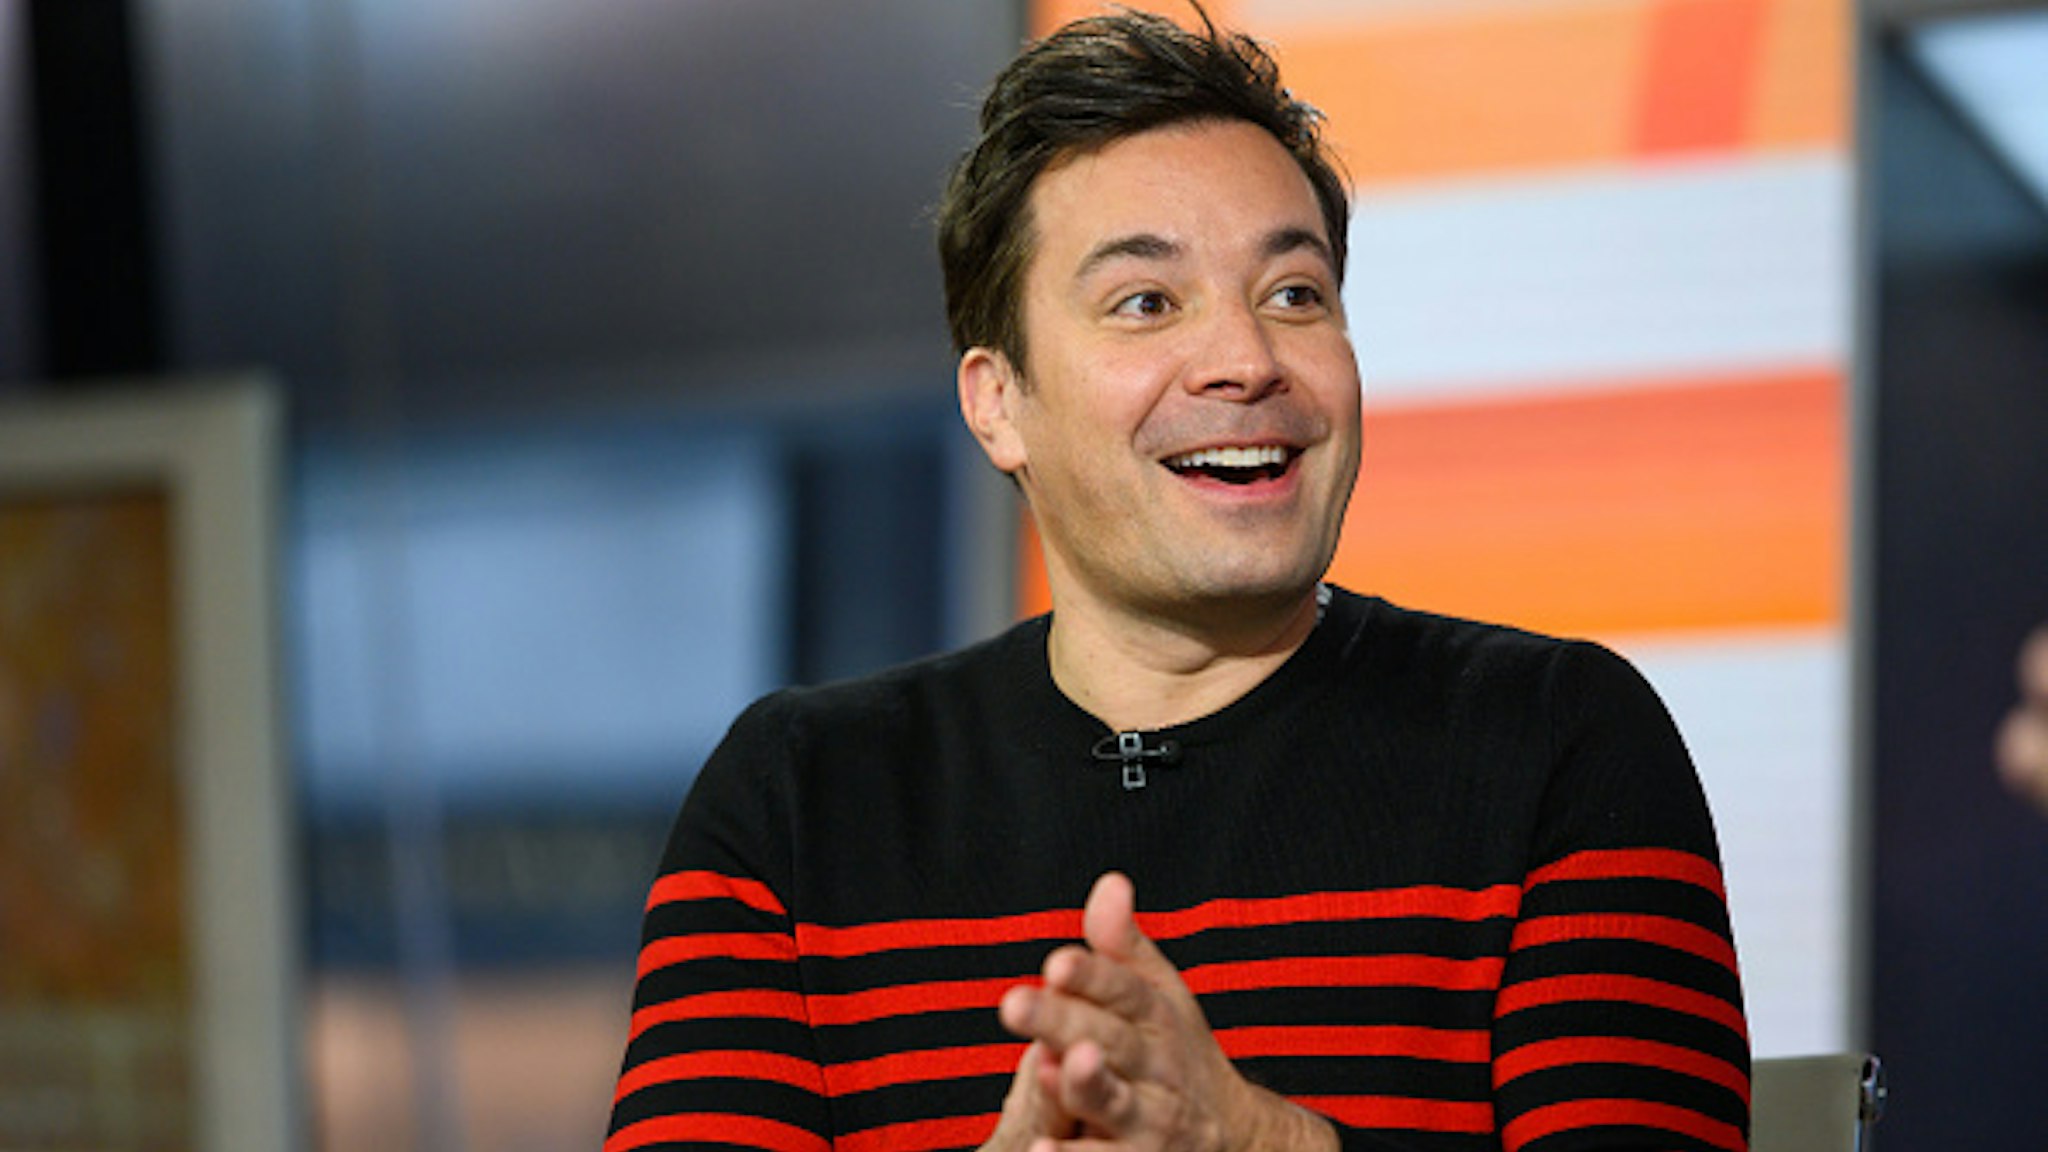 TODAY -- Pictured: Jimmy Fallon on Tuesday, January 28, 2020 --